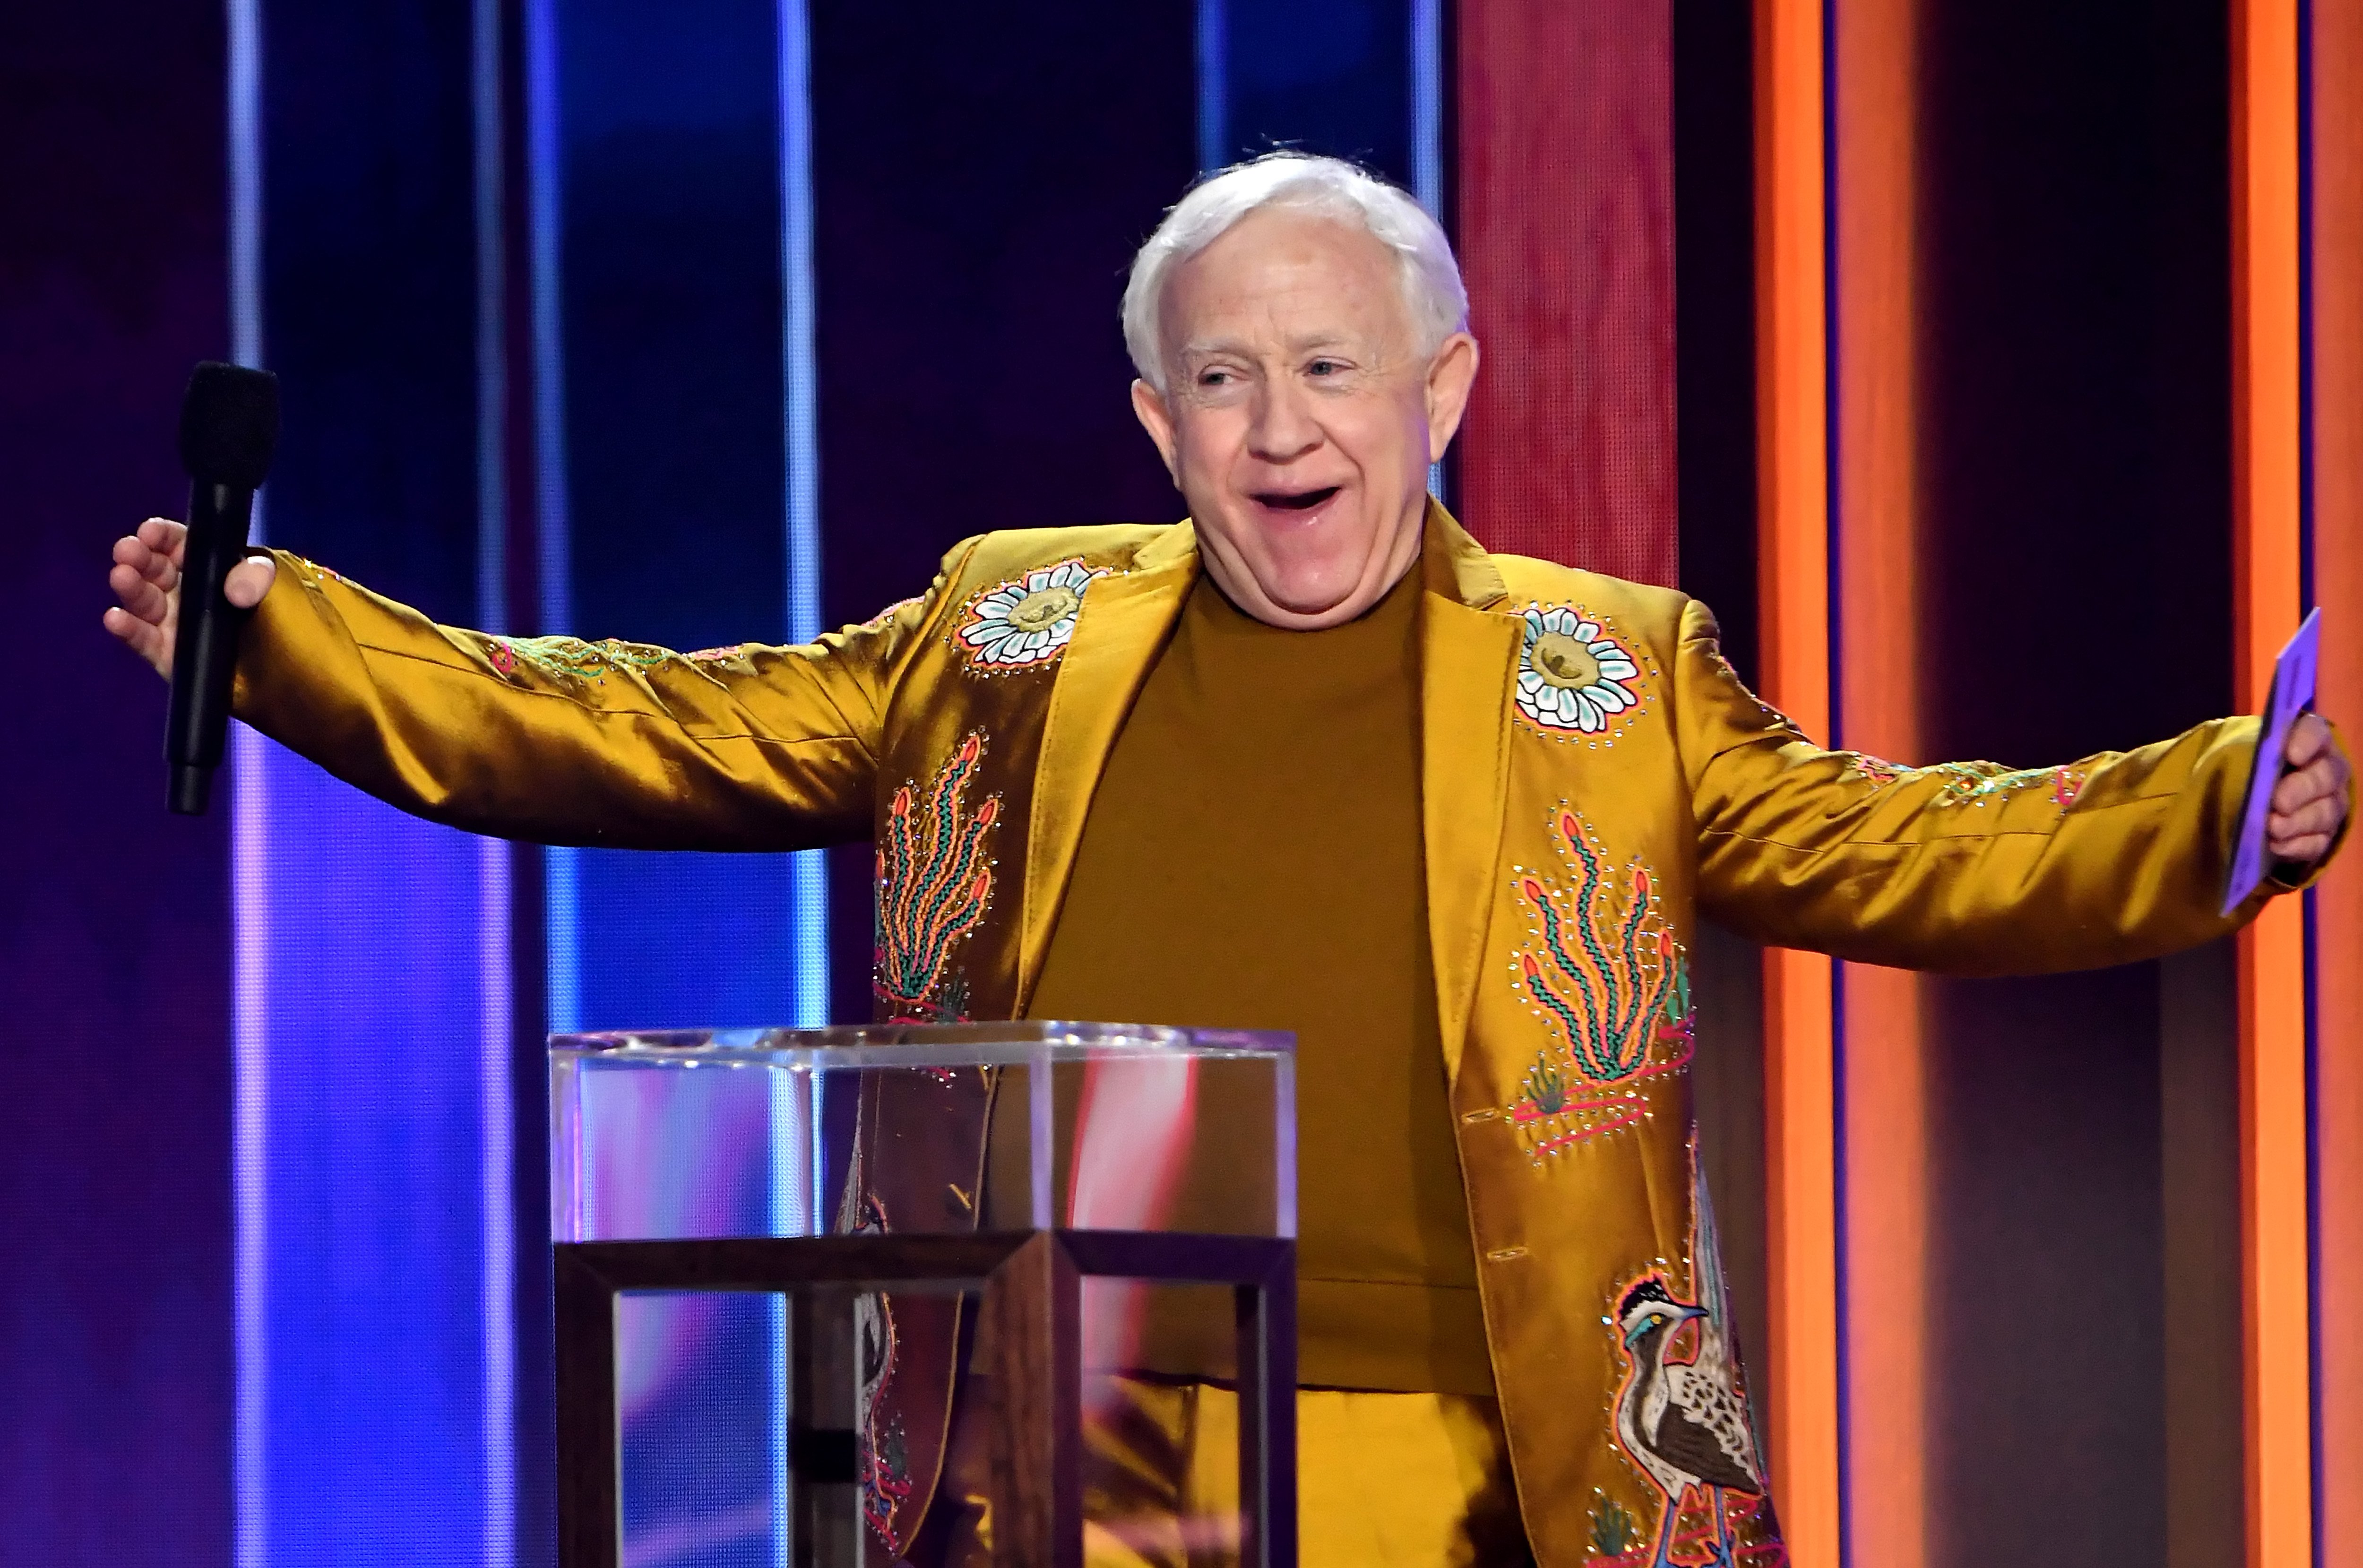 Leslie Jordan pictured at the 56th Academy of Country Music Awards at the Grand Ole Opry, 2021, Nashville, Tennessee. 